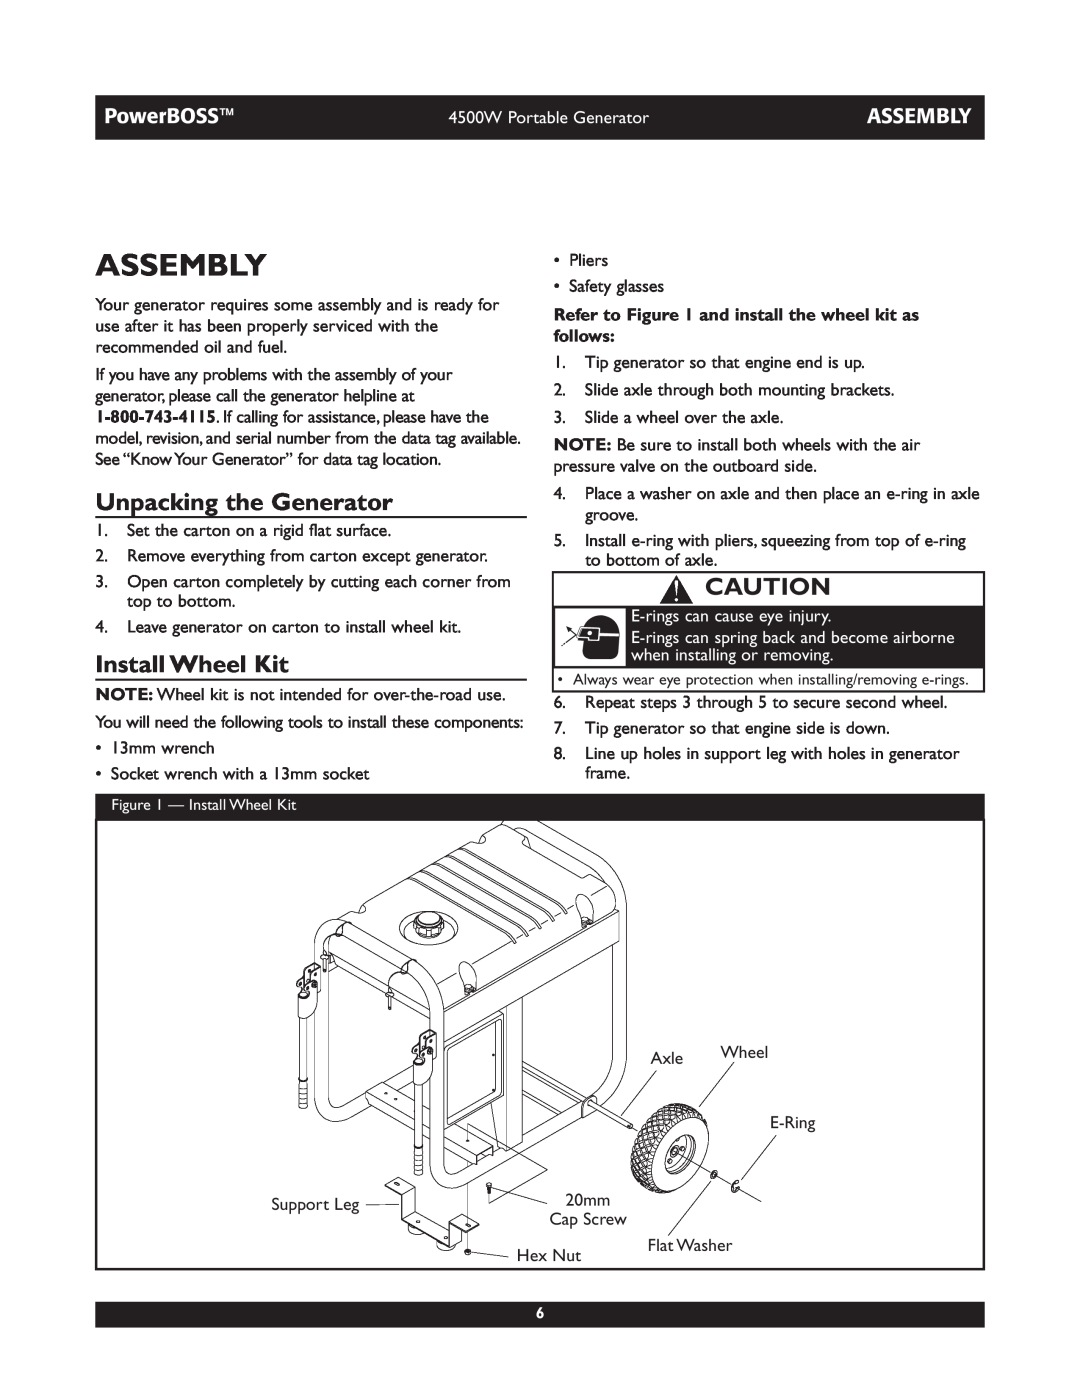 Briggs & Stratton 01648-1 Assembly, Unpacking the Generator, Install Wheel Kit, E-rings can cause eye injury, PowerBOSS 